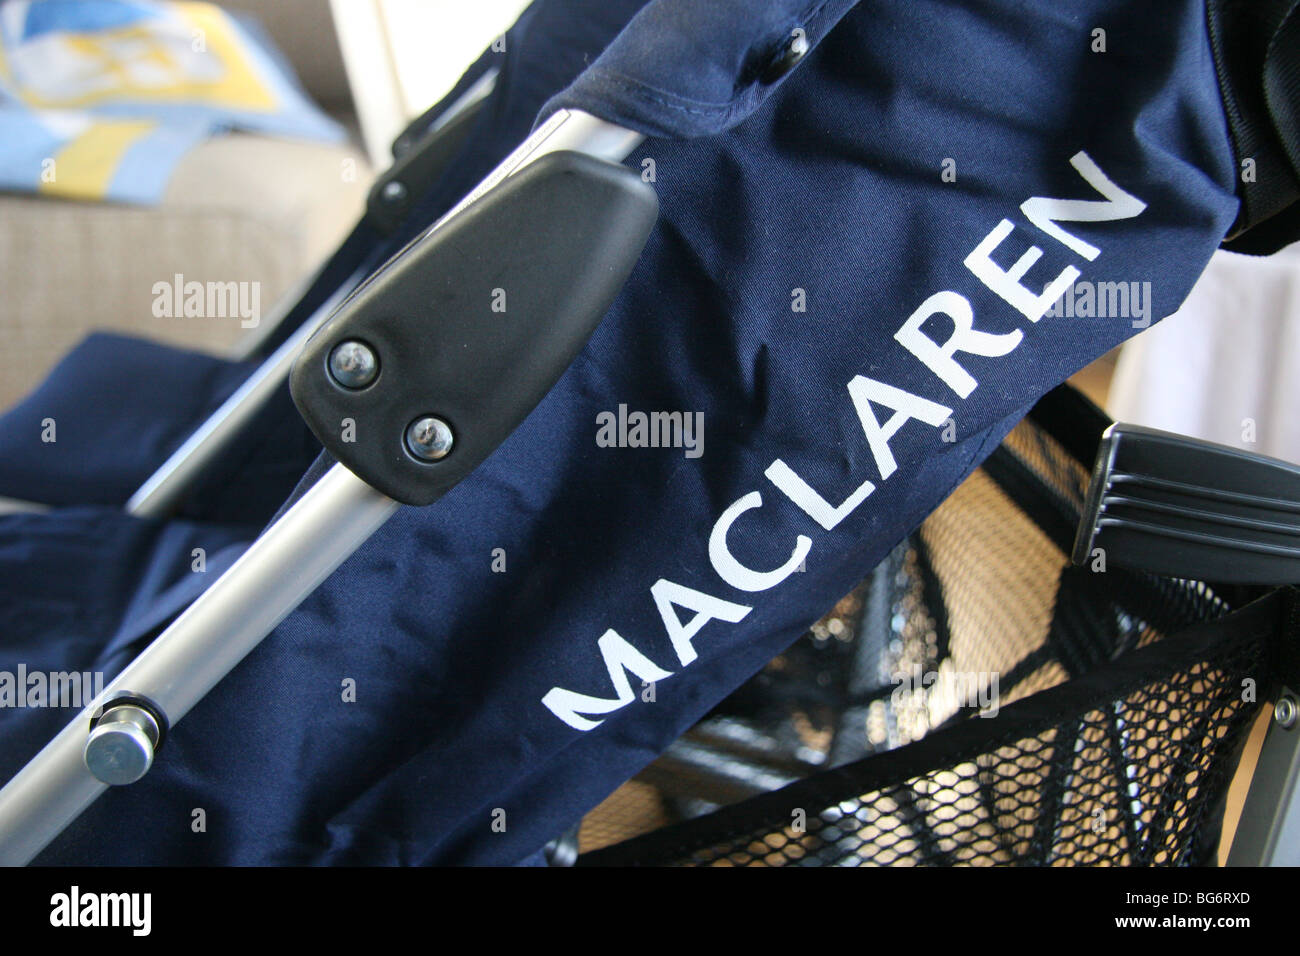 Maclaren stroller hinge involved in recall, shown on a Twin Triumph stroller. Stock Photo